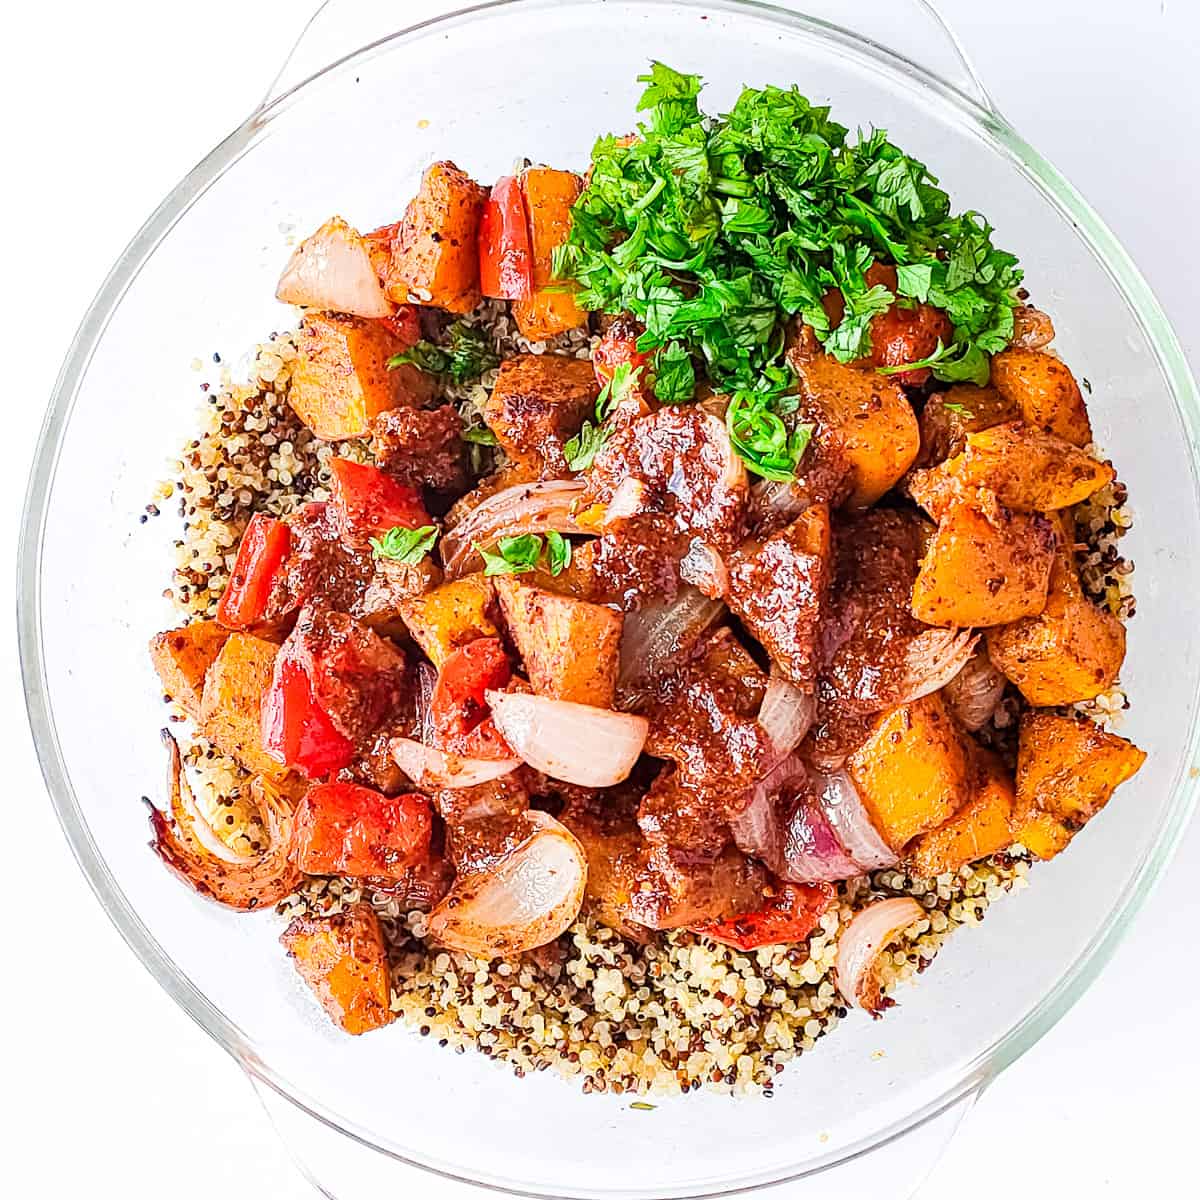 Pumpkin spice dressing drizzled on quinoa and roasted vegetables in a glass bowl.